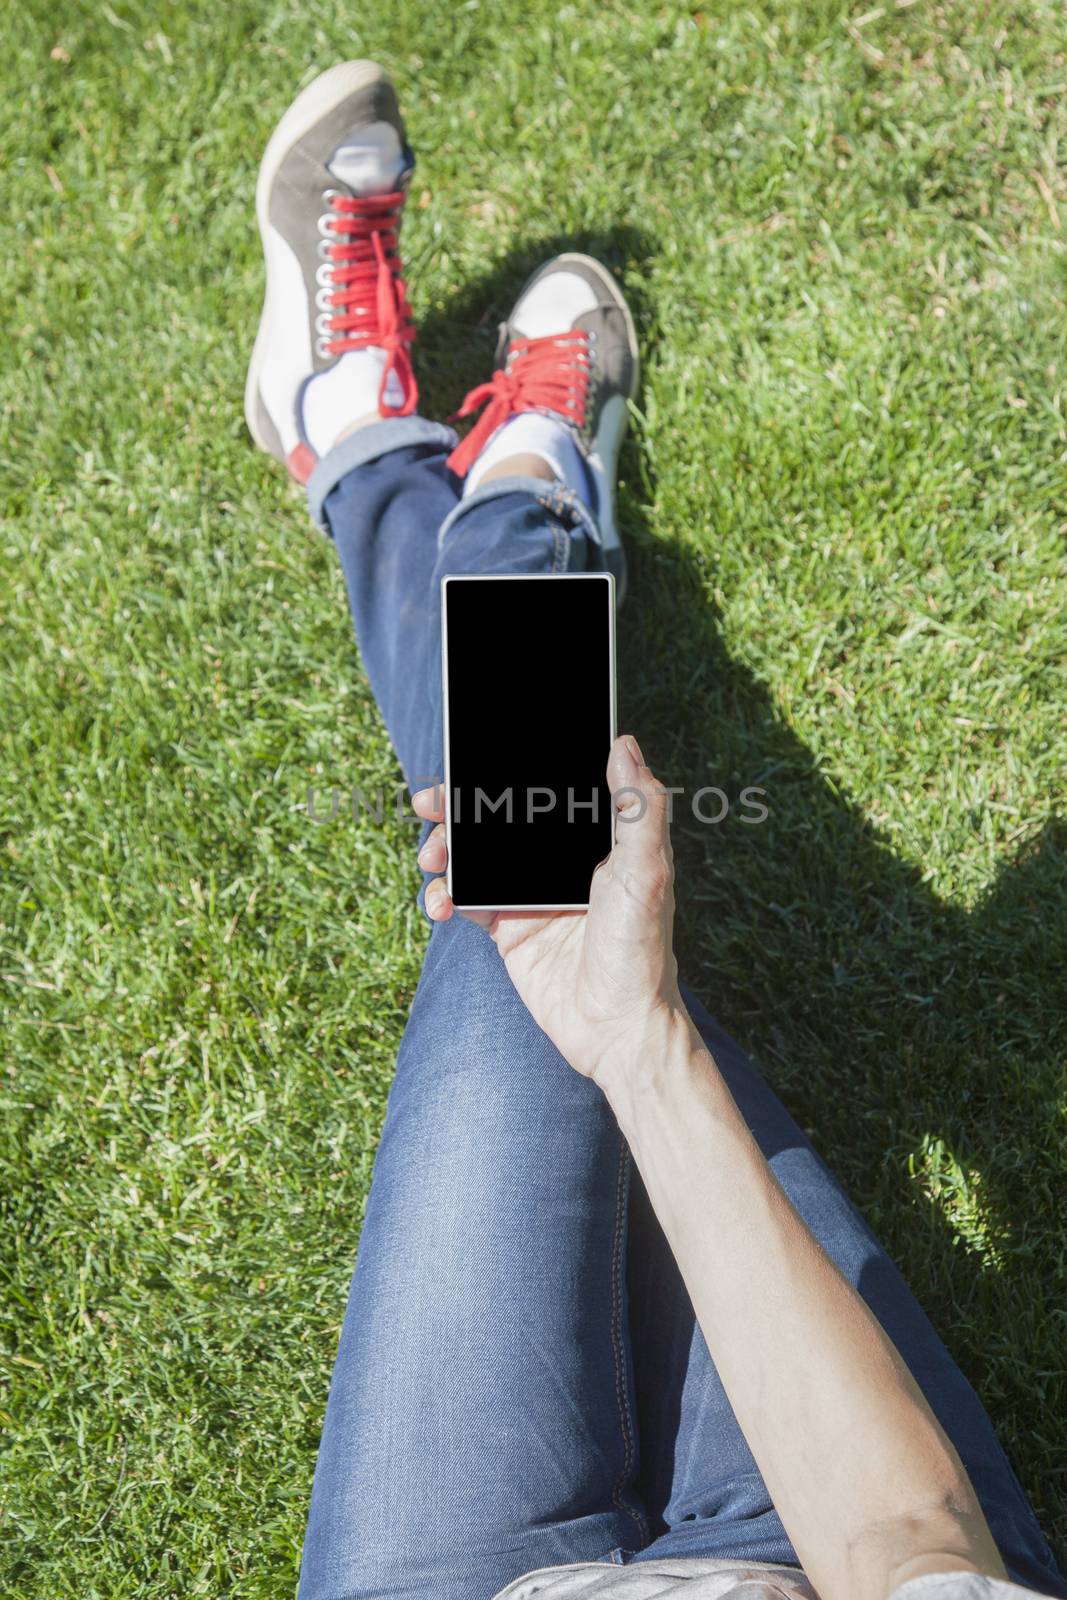 phone in hand legged on grass by quintanilla